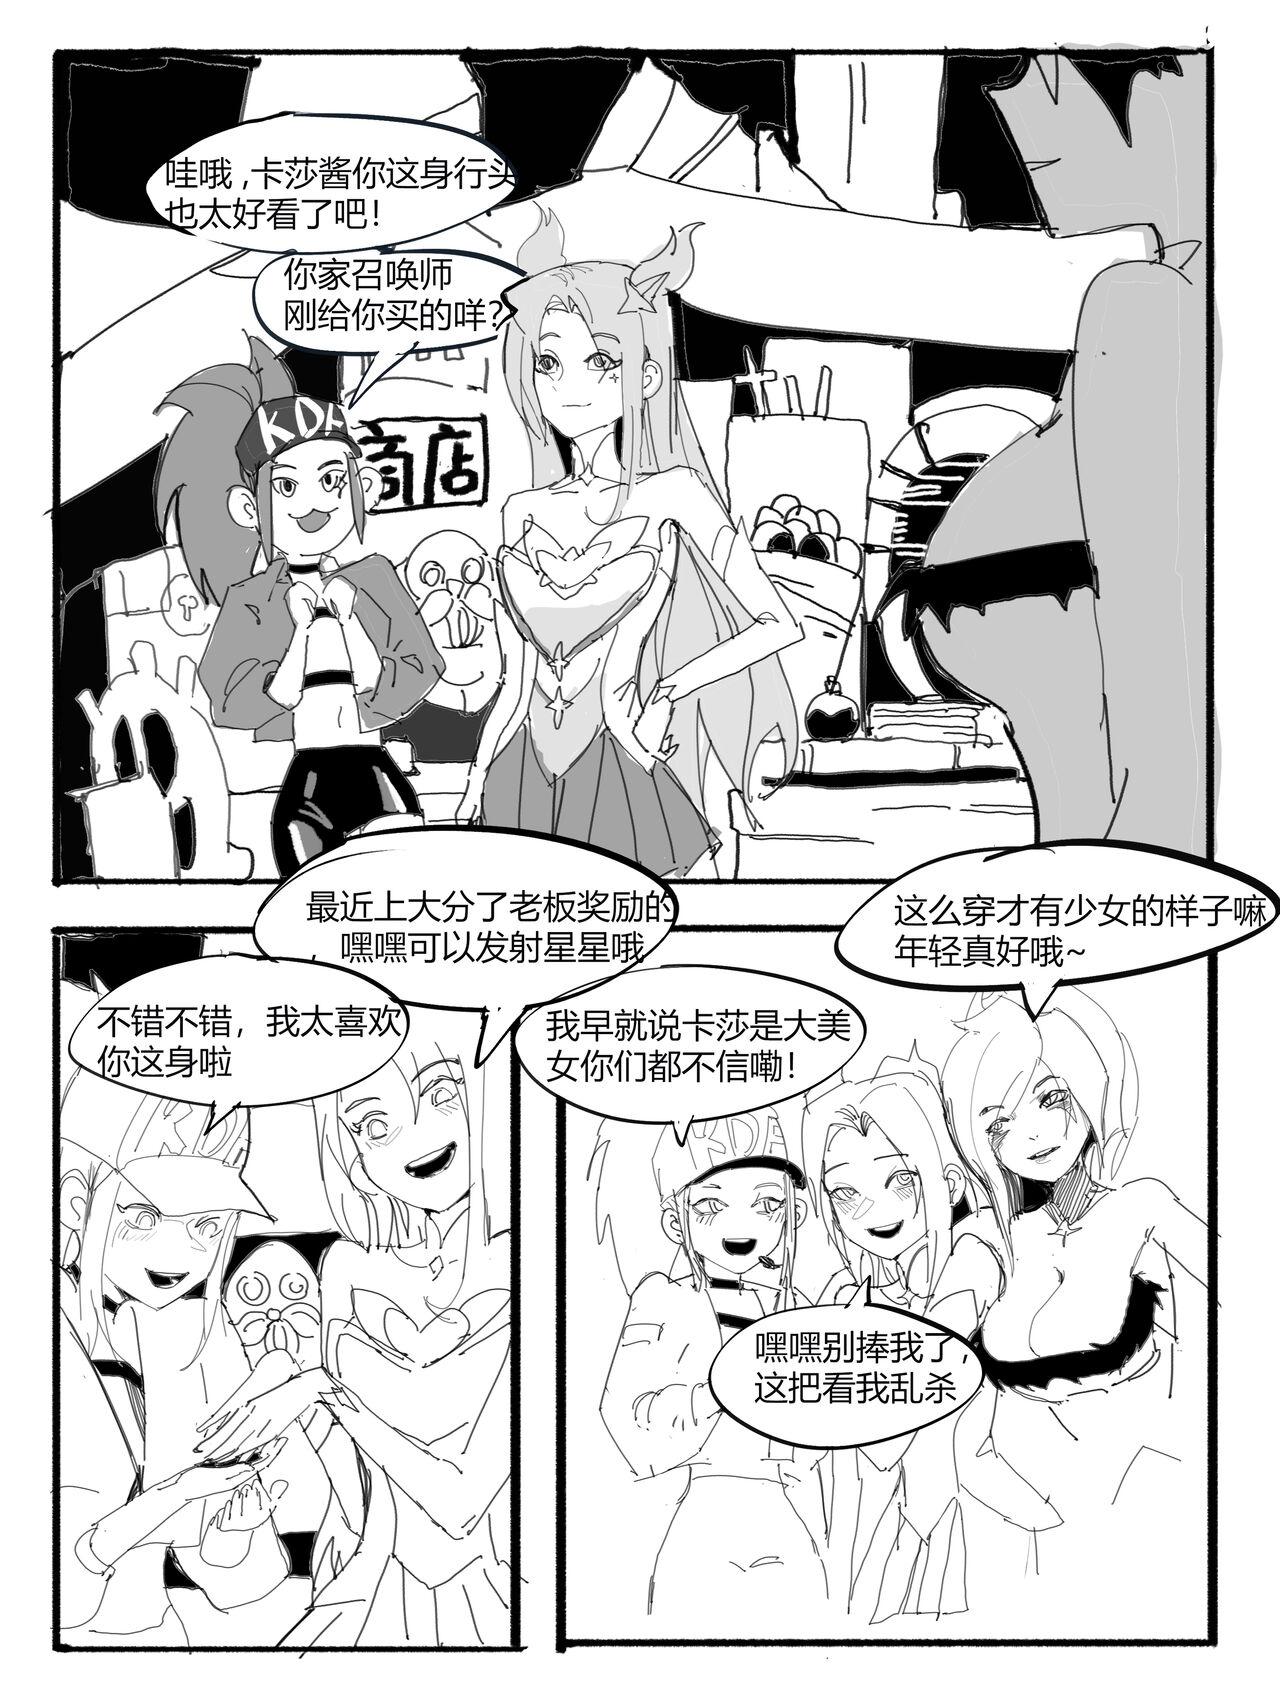 Amature 被炼金男爵控制的中辅二人欺负卡莎 - League of legends Free 18 Year Old Porn - Page 2